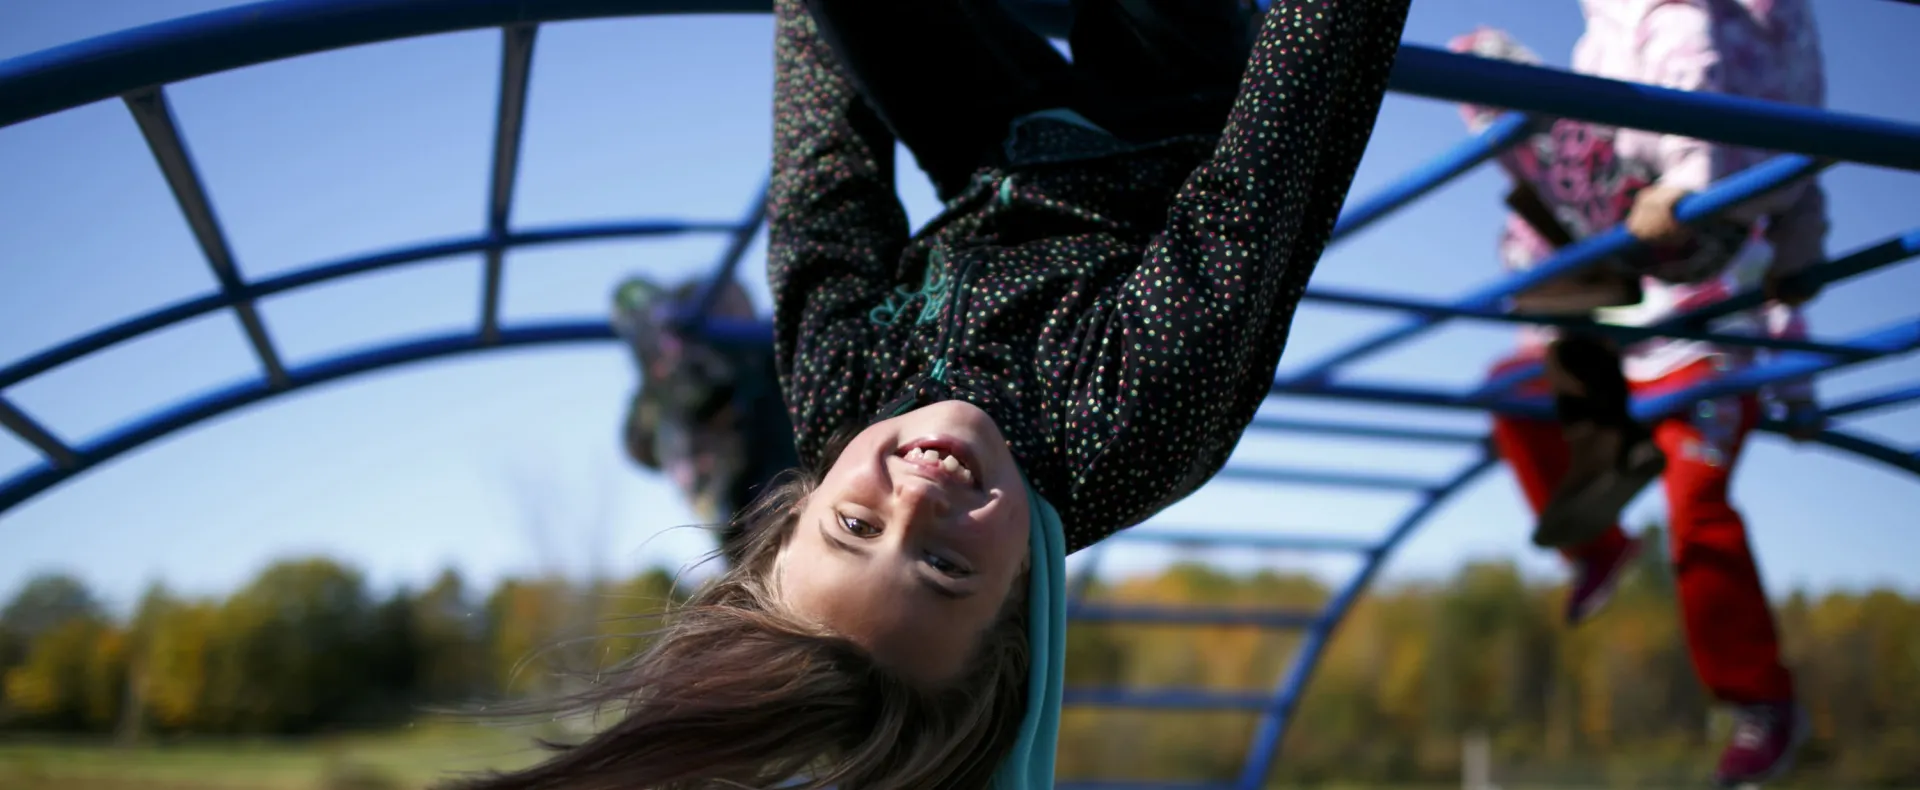 Girl hanging upside down from monkey bars